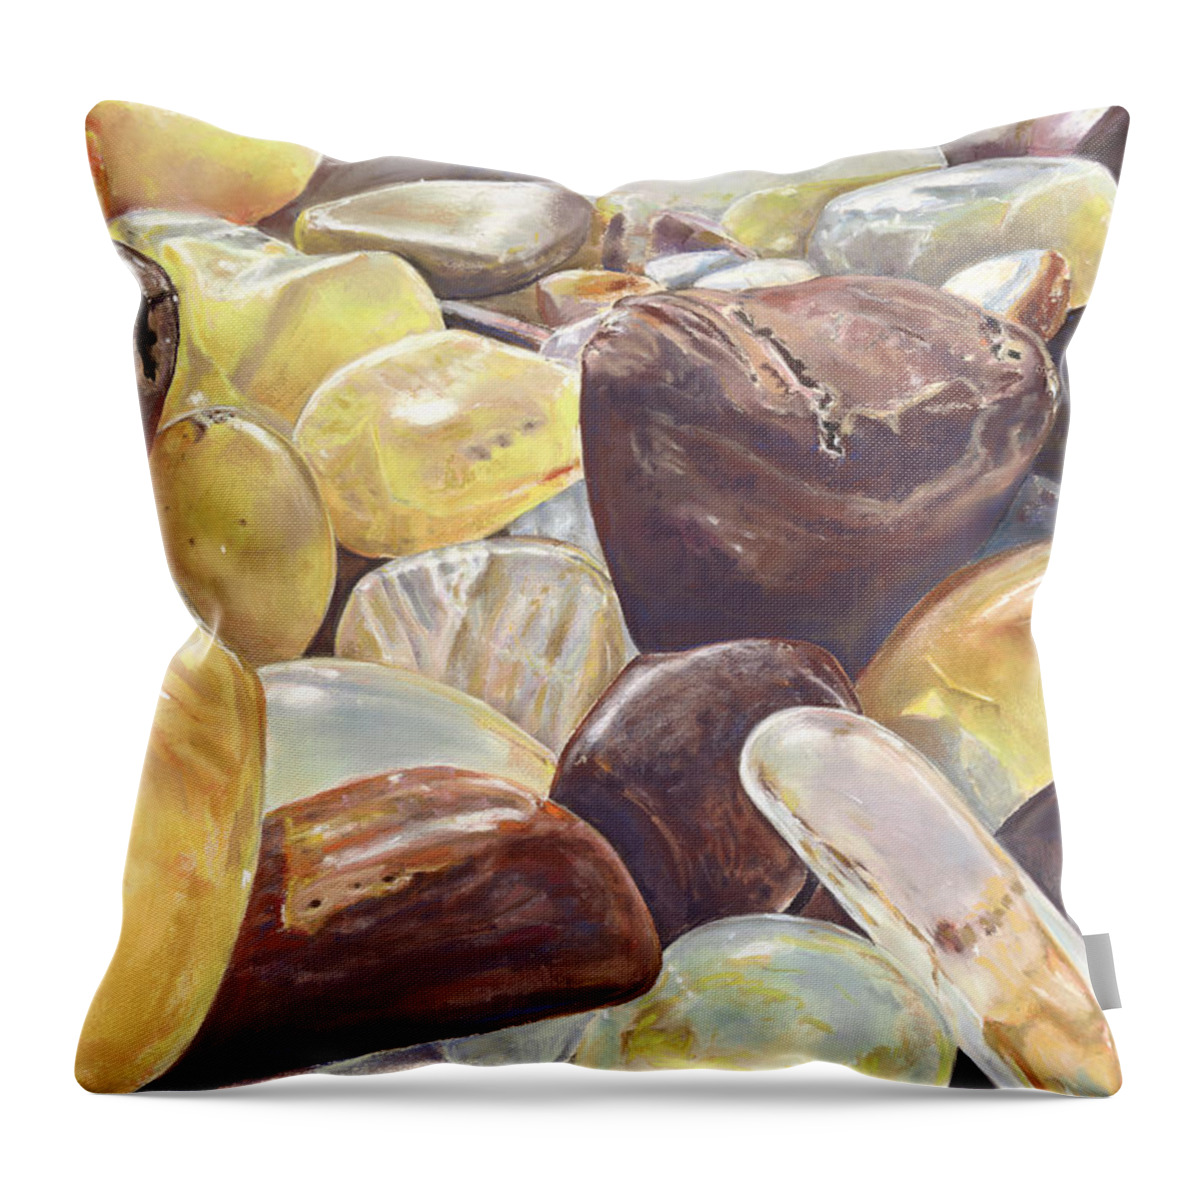 Birdseye Art Studio Throw Pillow featuring the painting Tumbled Agates by Nick Payne